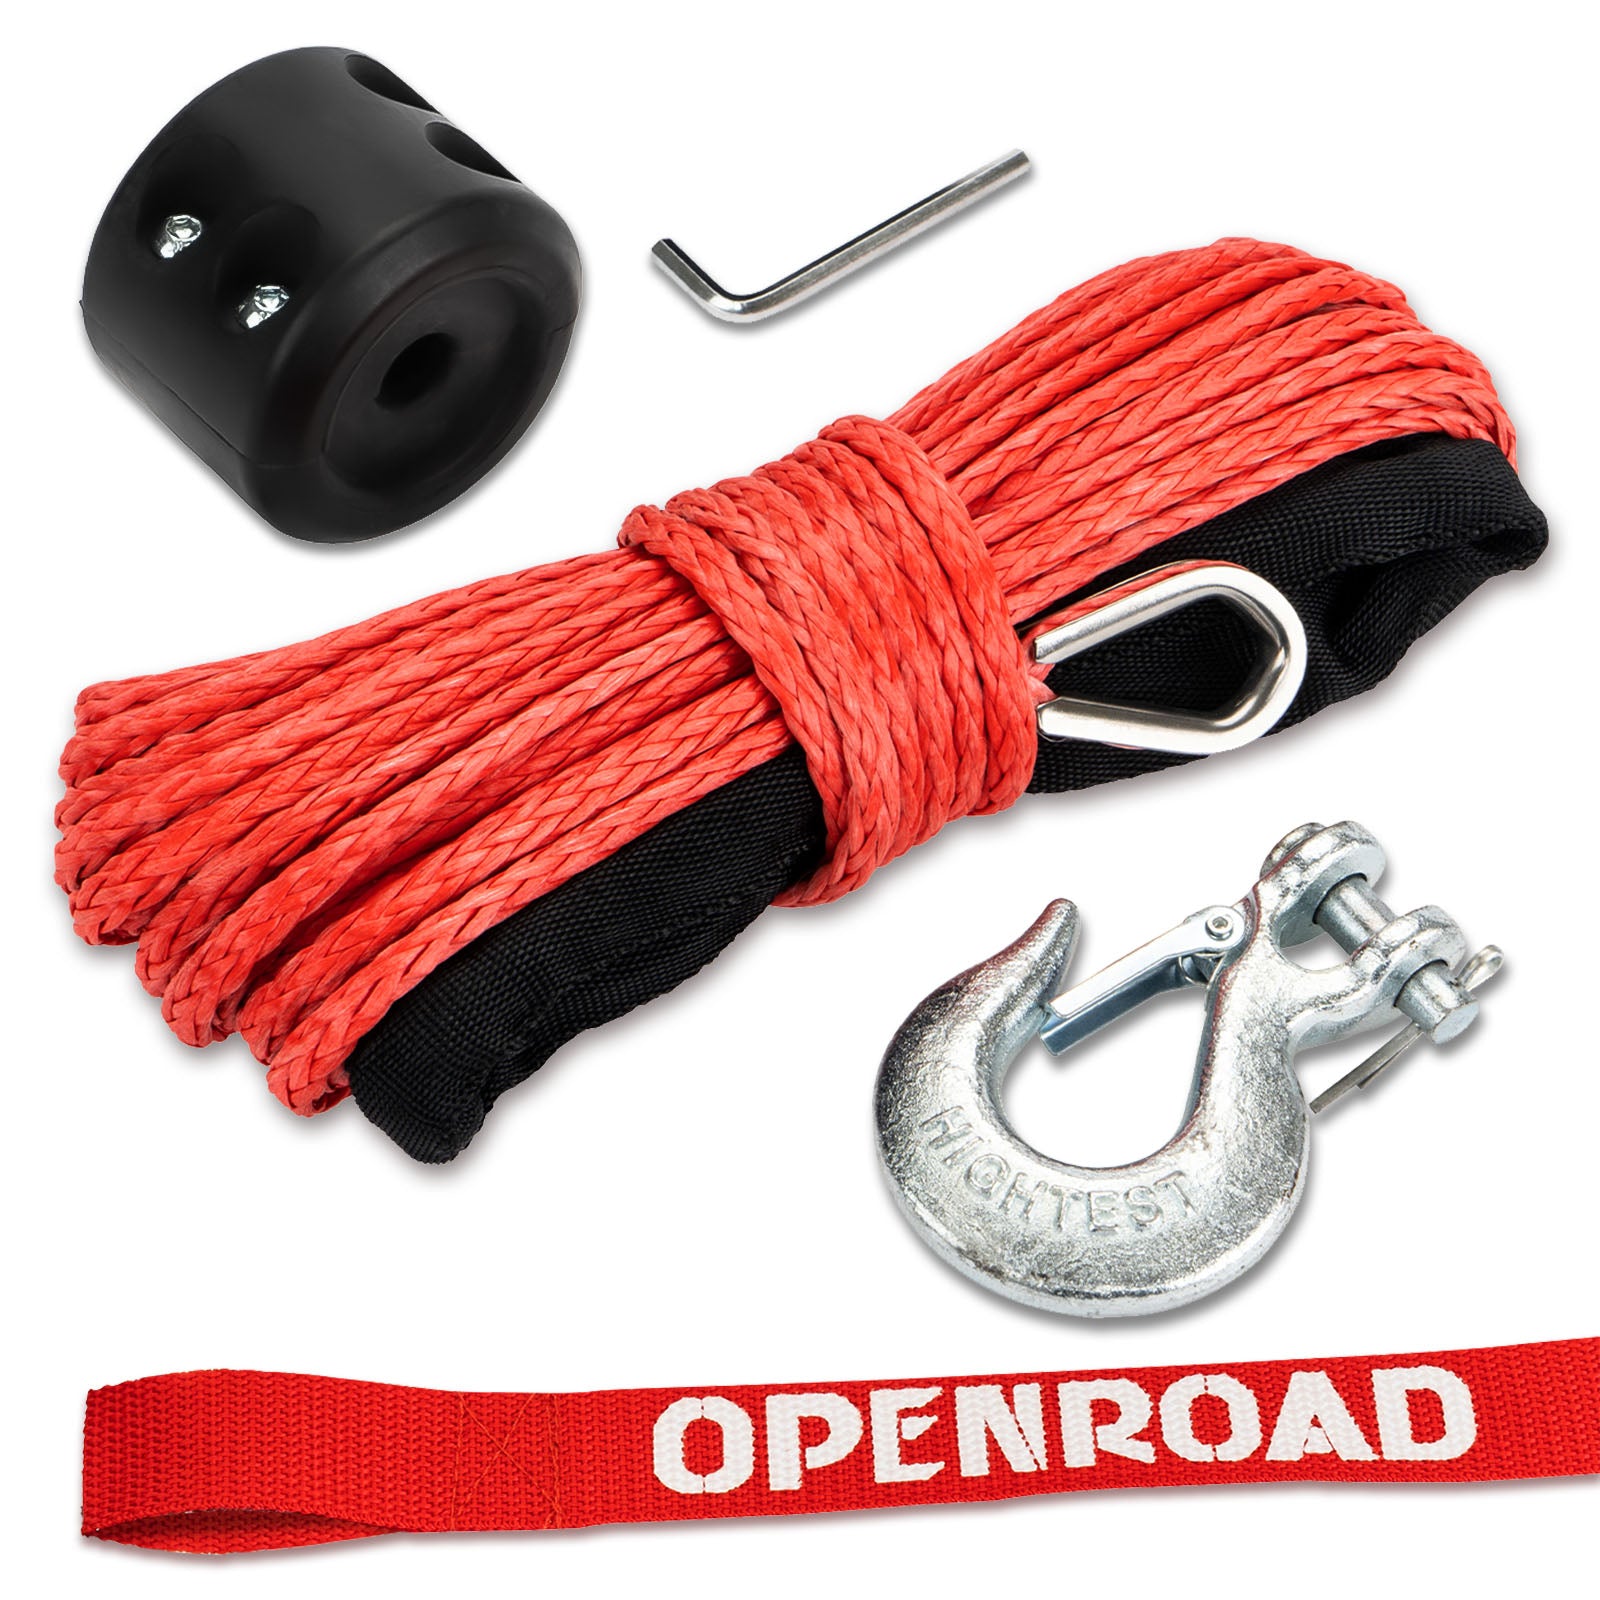 OPENROAD 1600lbs Hand Winch with Cable Manual Winchn for